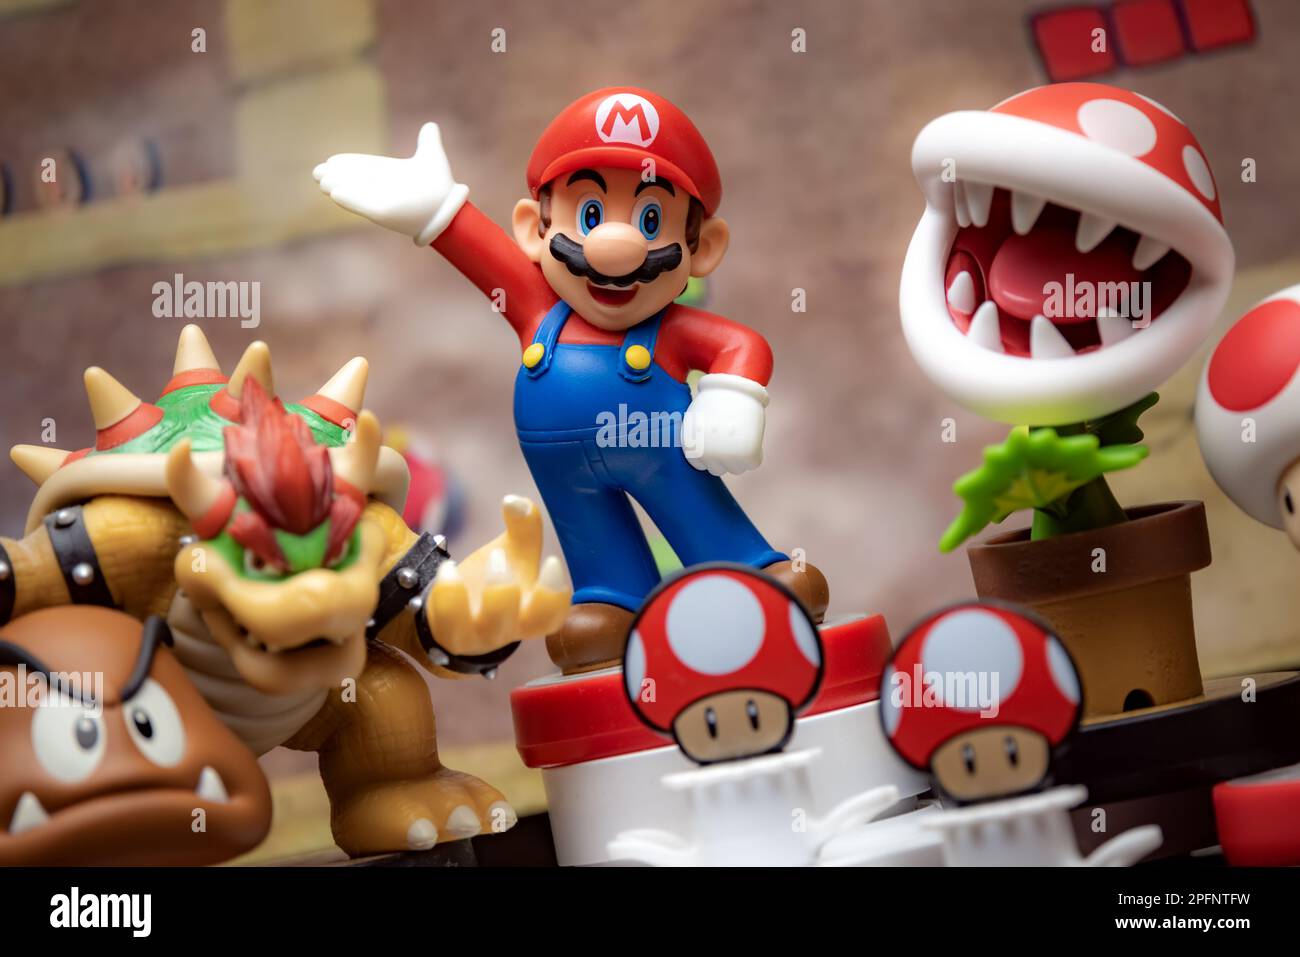 MOSCOW, RUSSIA - September 08, 2022: Super Mario Bros figure character.Super Mario is a Japanese platform video game series and media franchise create Stock Photo